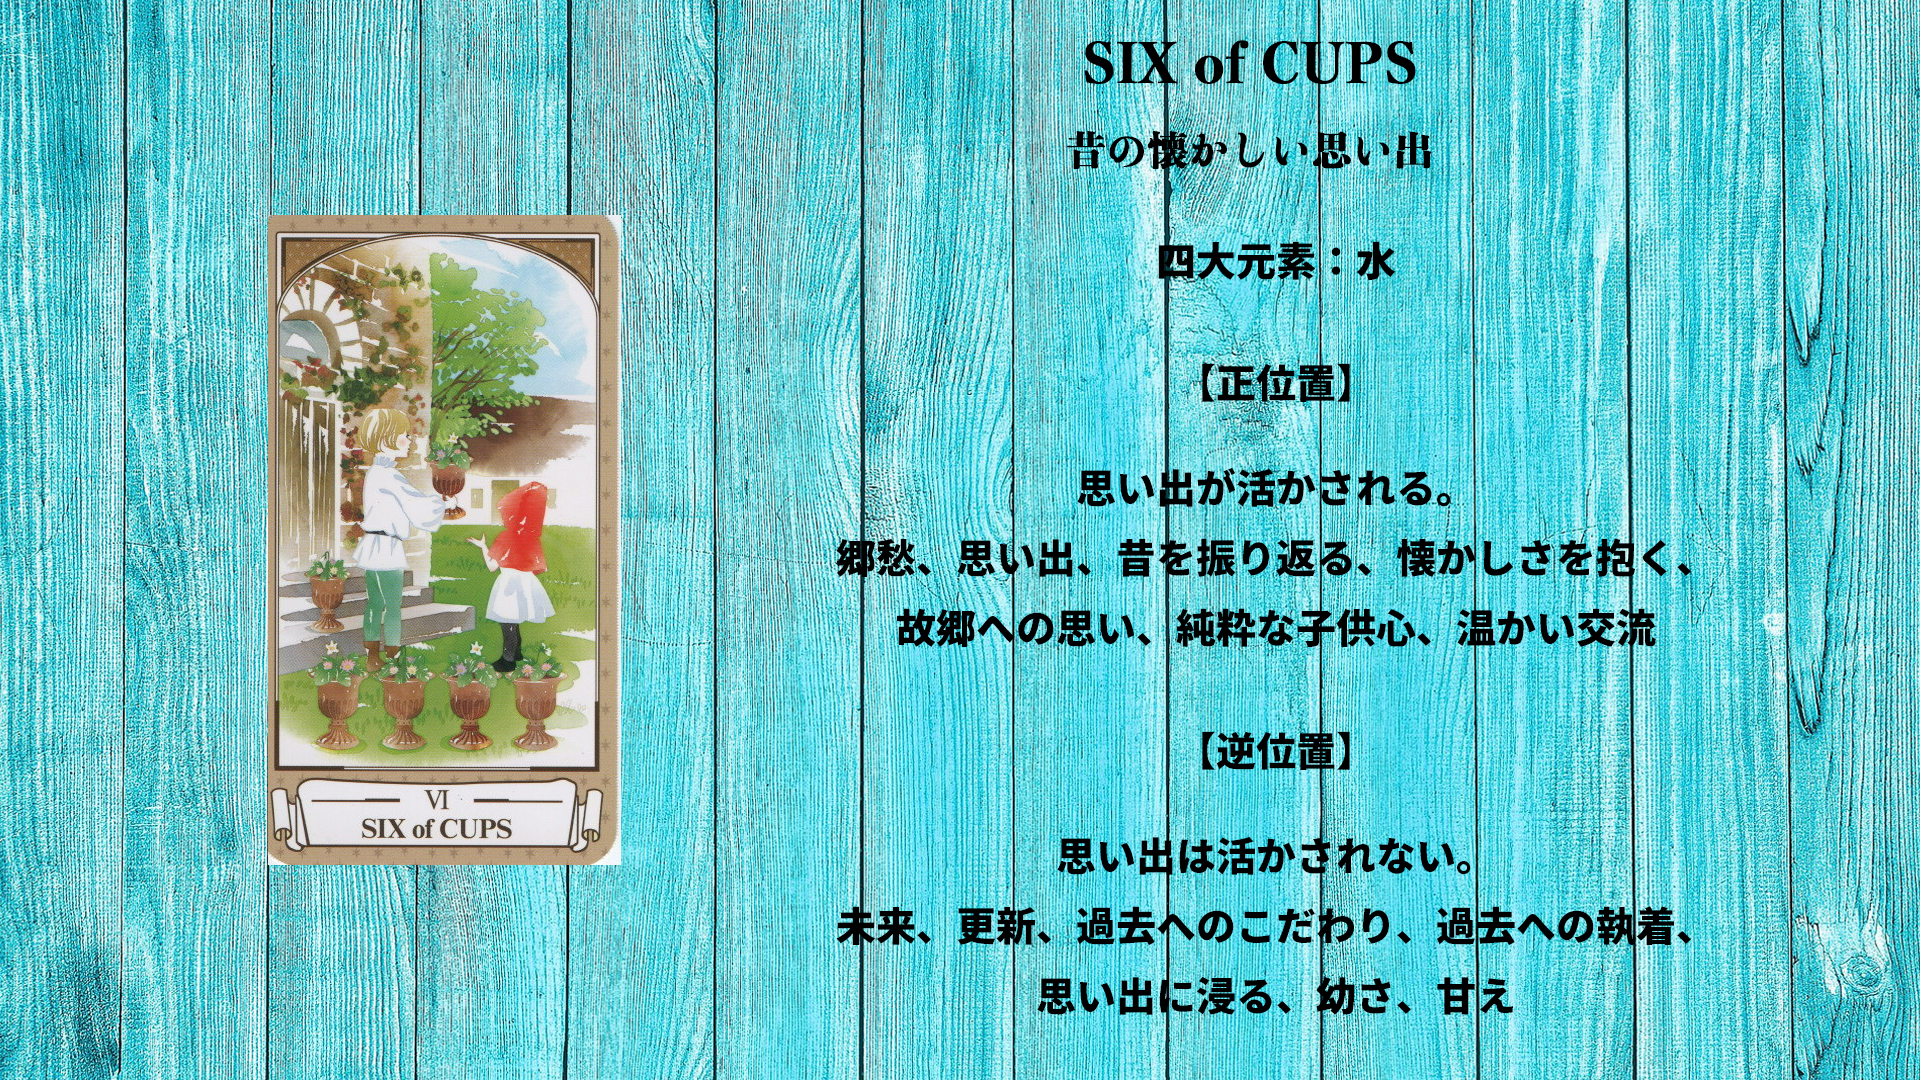 SIX of CUPS